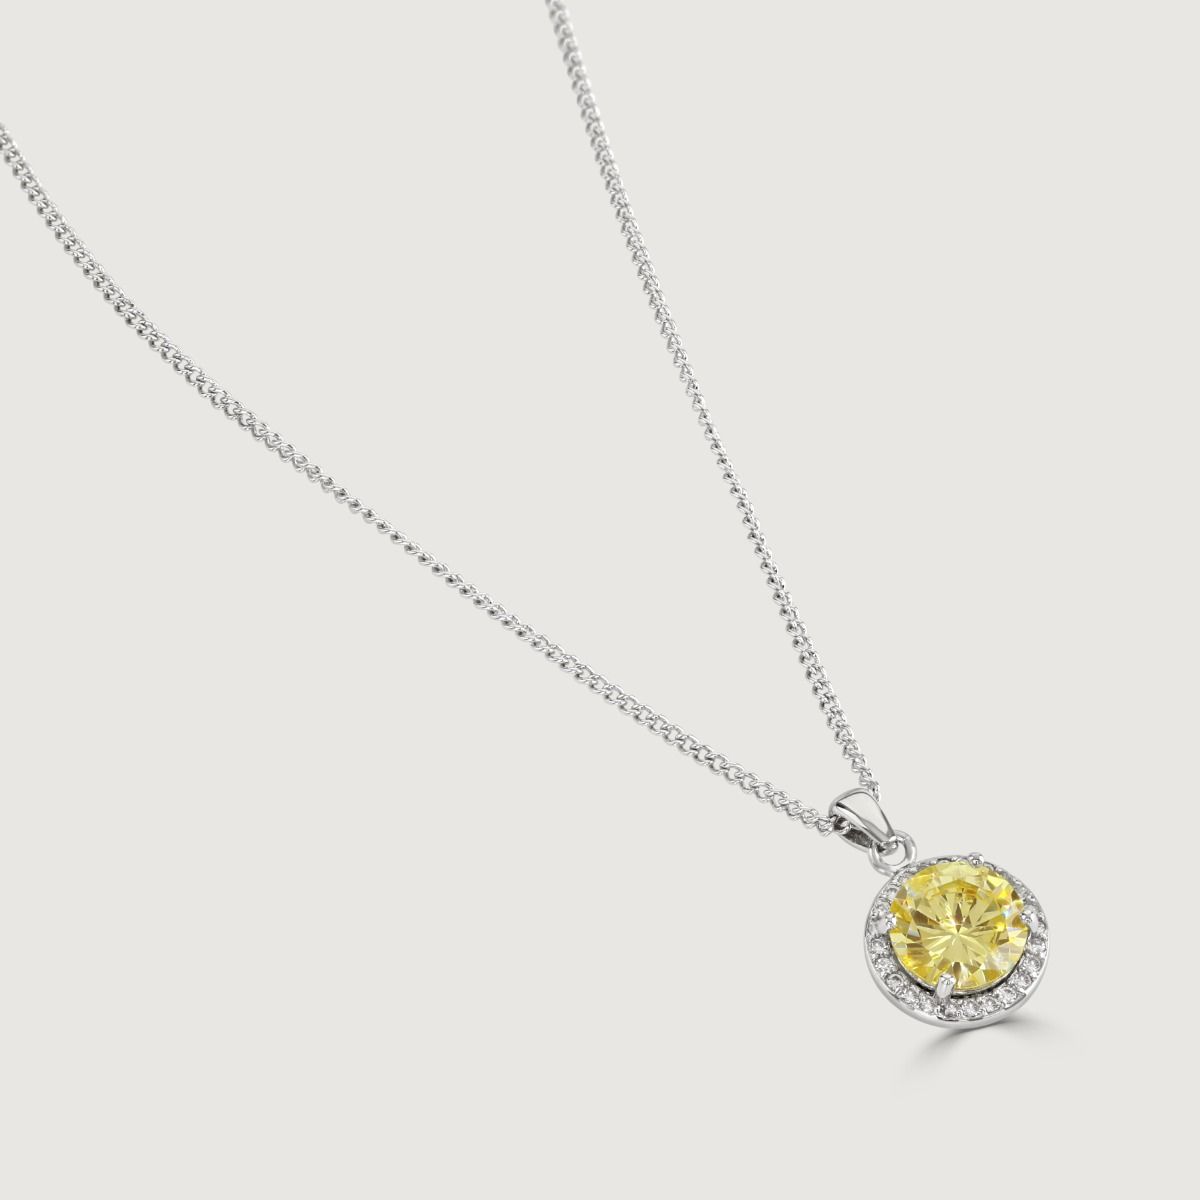 Reveal the allure of our Canary Halo Solitare Pendant, adorned with meticulously crafted cubic zirconia stones encircling a radiant clear round-cut centre. Elevate your style effortlessly with this timeless piece.